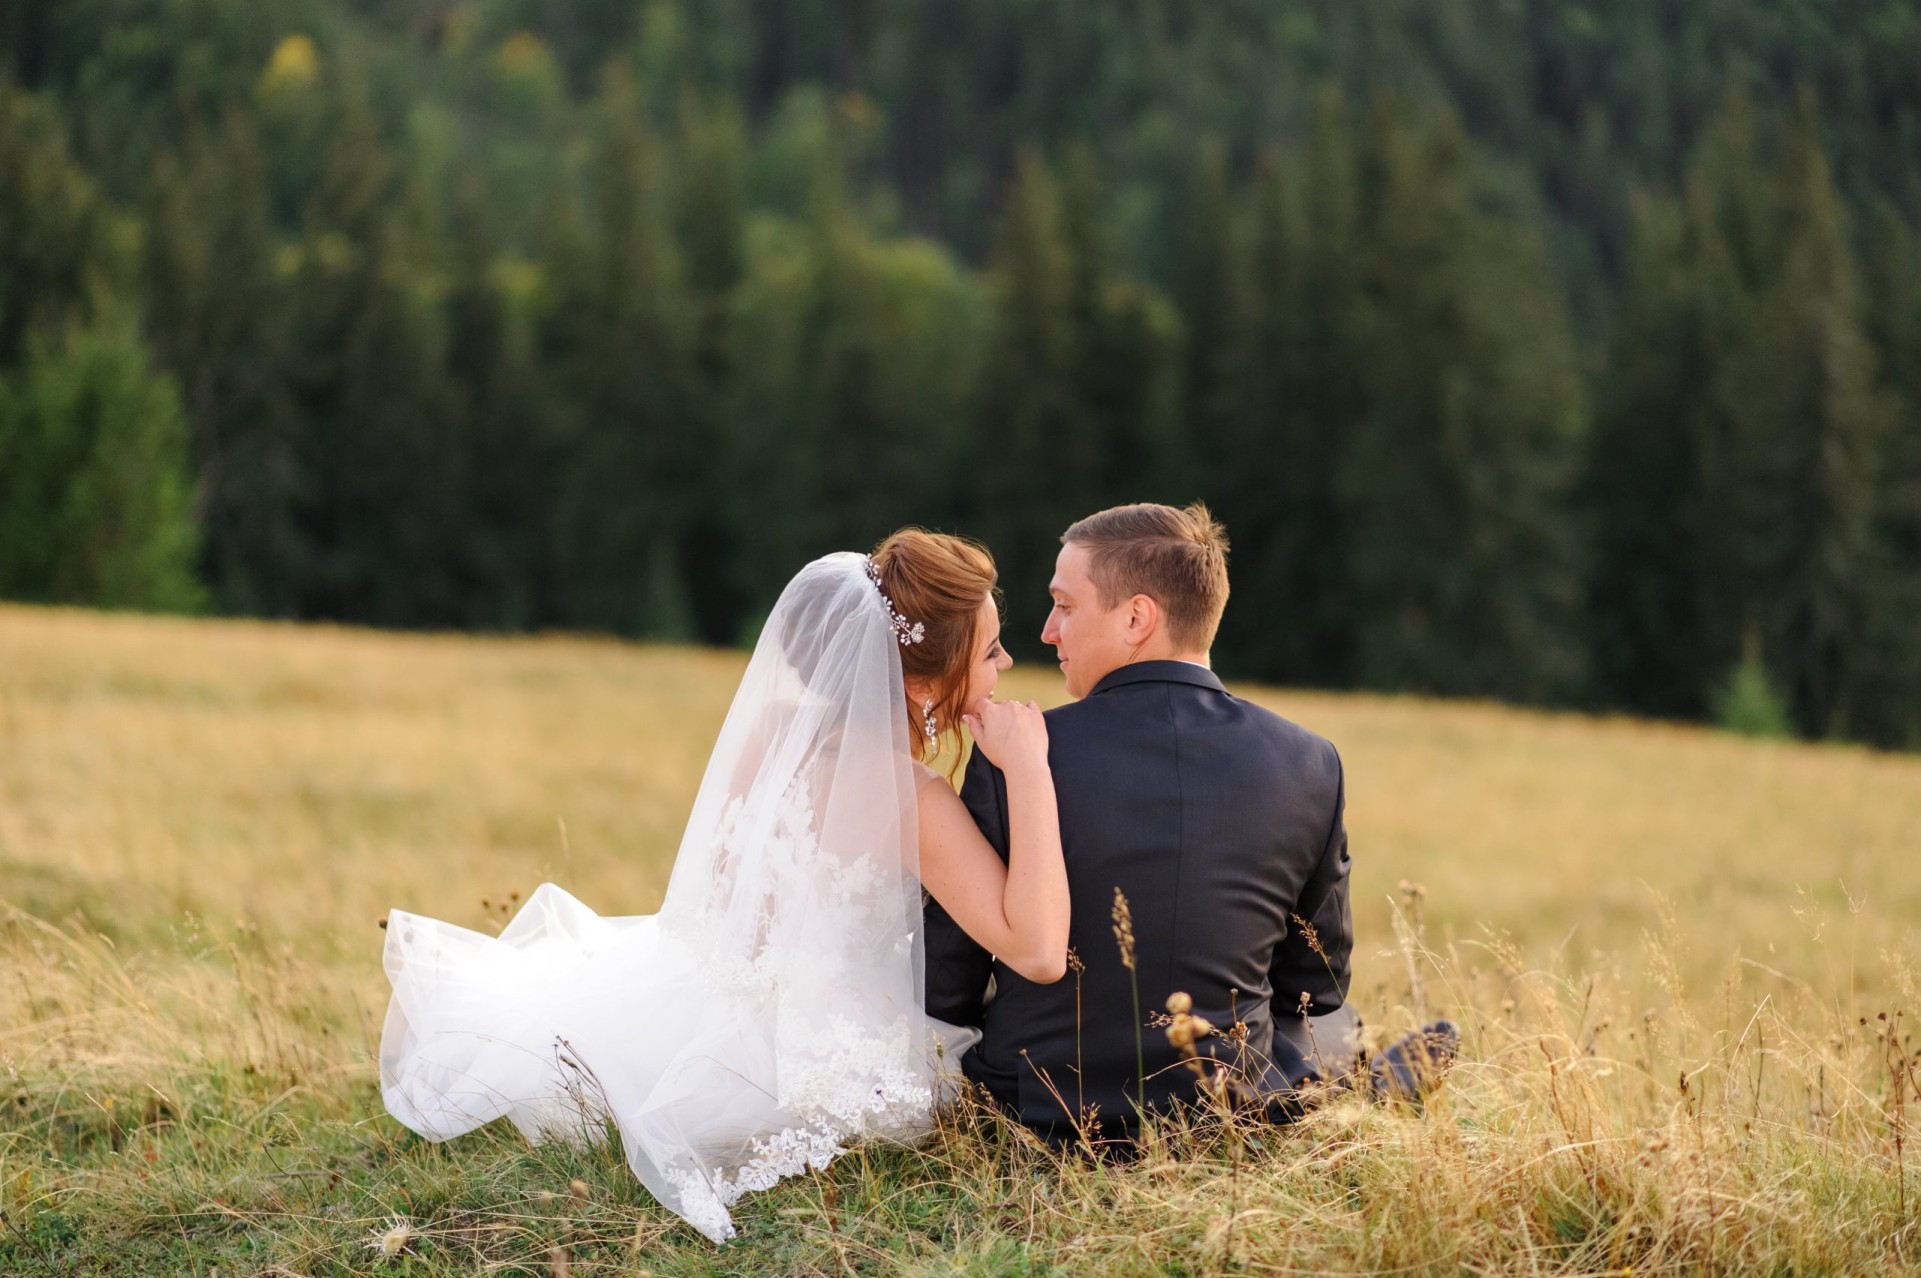 wedding photography in the mountains 2021 09 01 15 26 05 utc min scaled